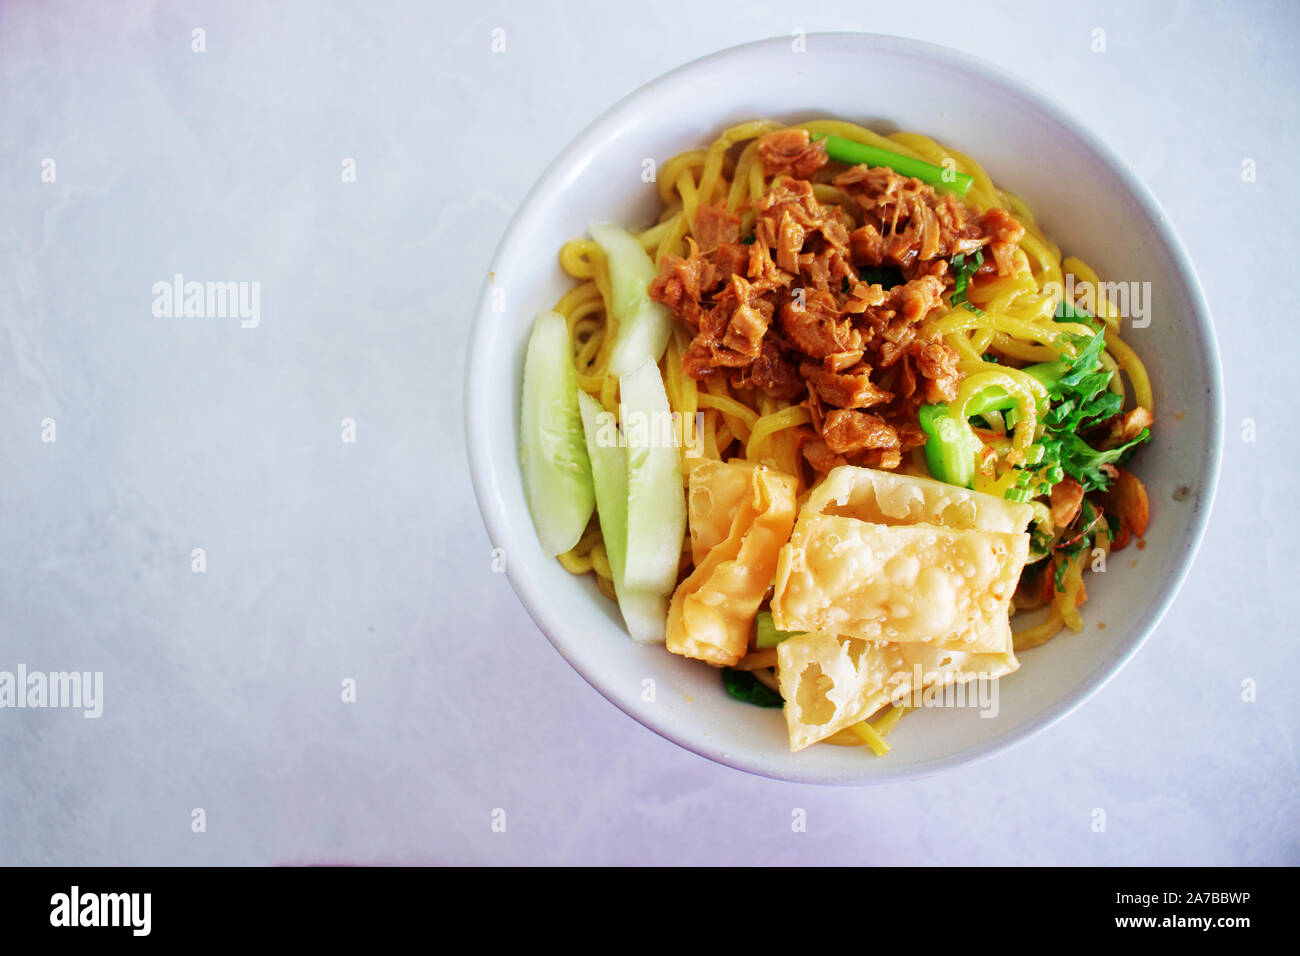 Tow Down View of Chicken Noodle Indonesian Food on White Background Stock Photo